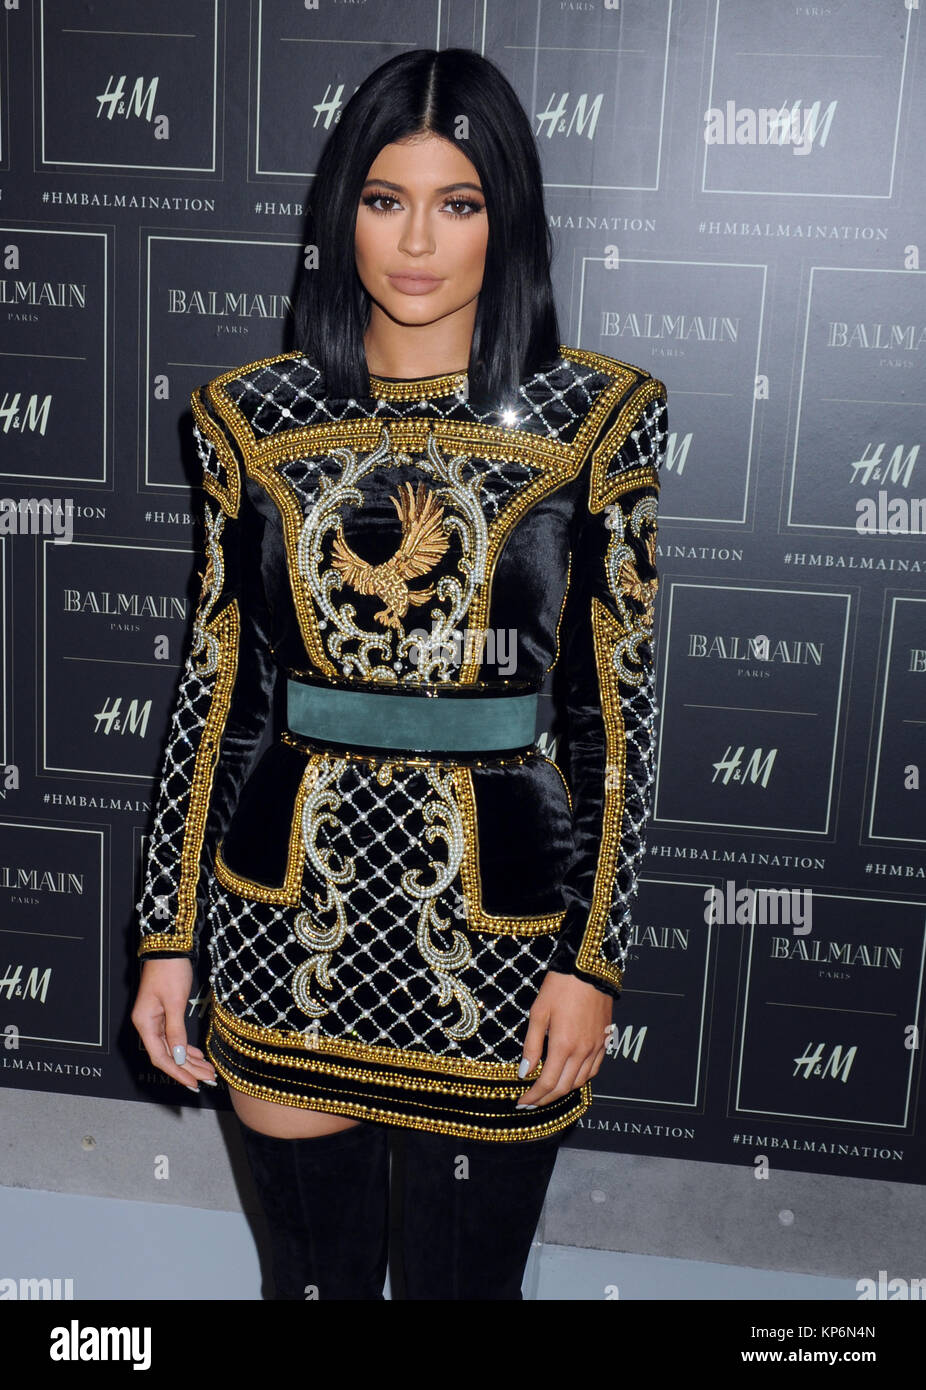 NEW YORK, NY - OCTOBER 20: Kylie Jenner at the BALMAIN X H&M collection  launch event at 23 Wall Street on October 20, 2015 in New York City.  People: Kylie Jenner Stock Photo - Alamy